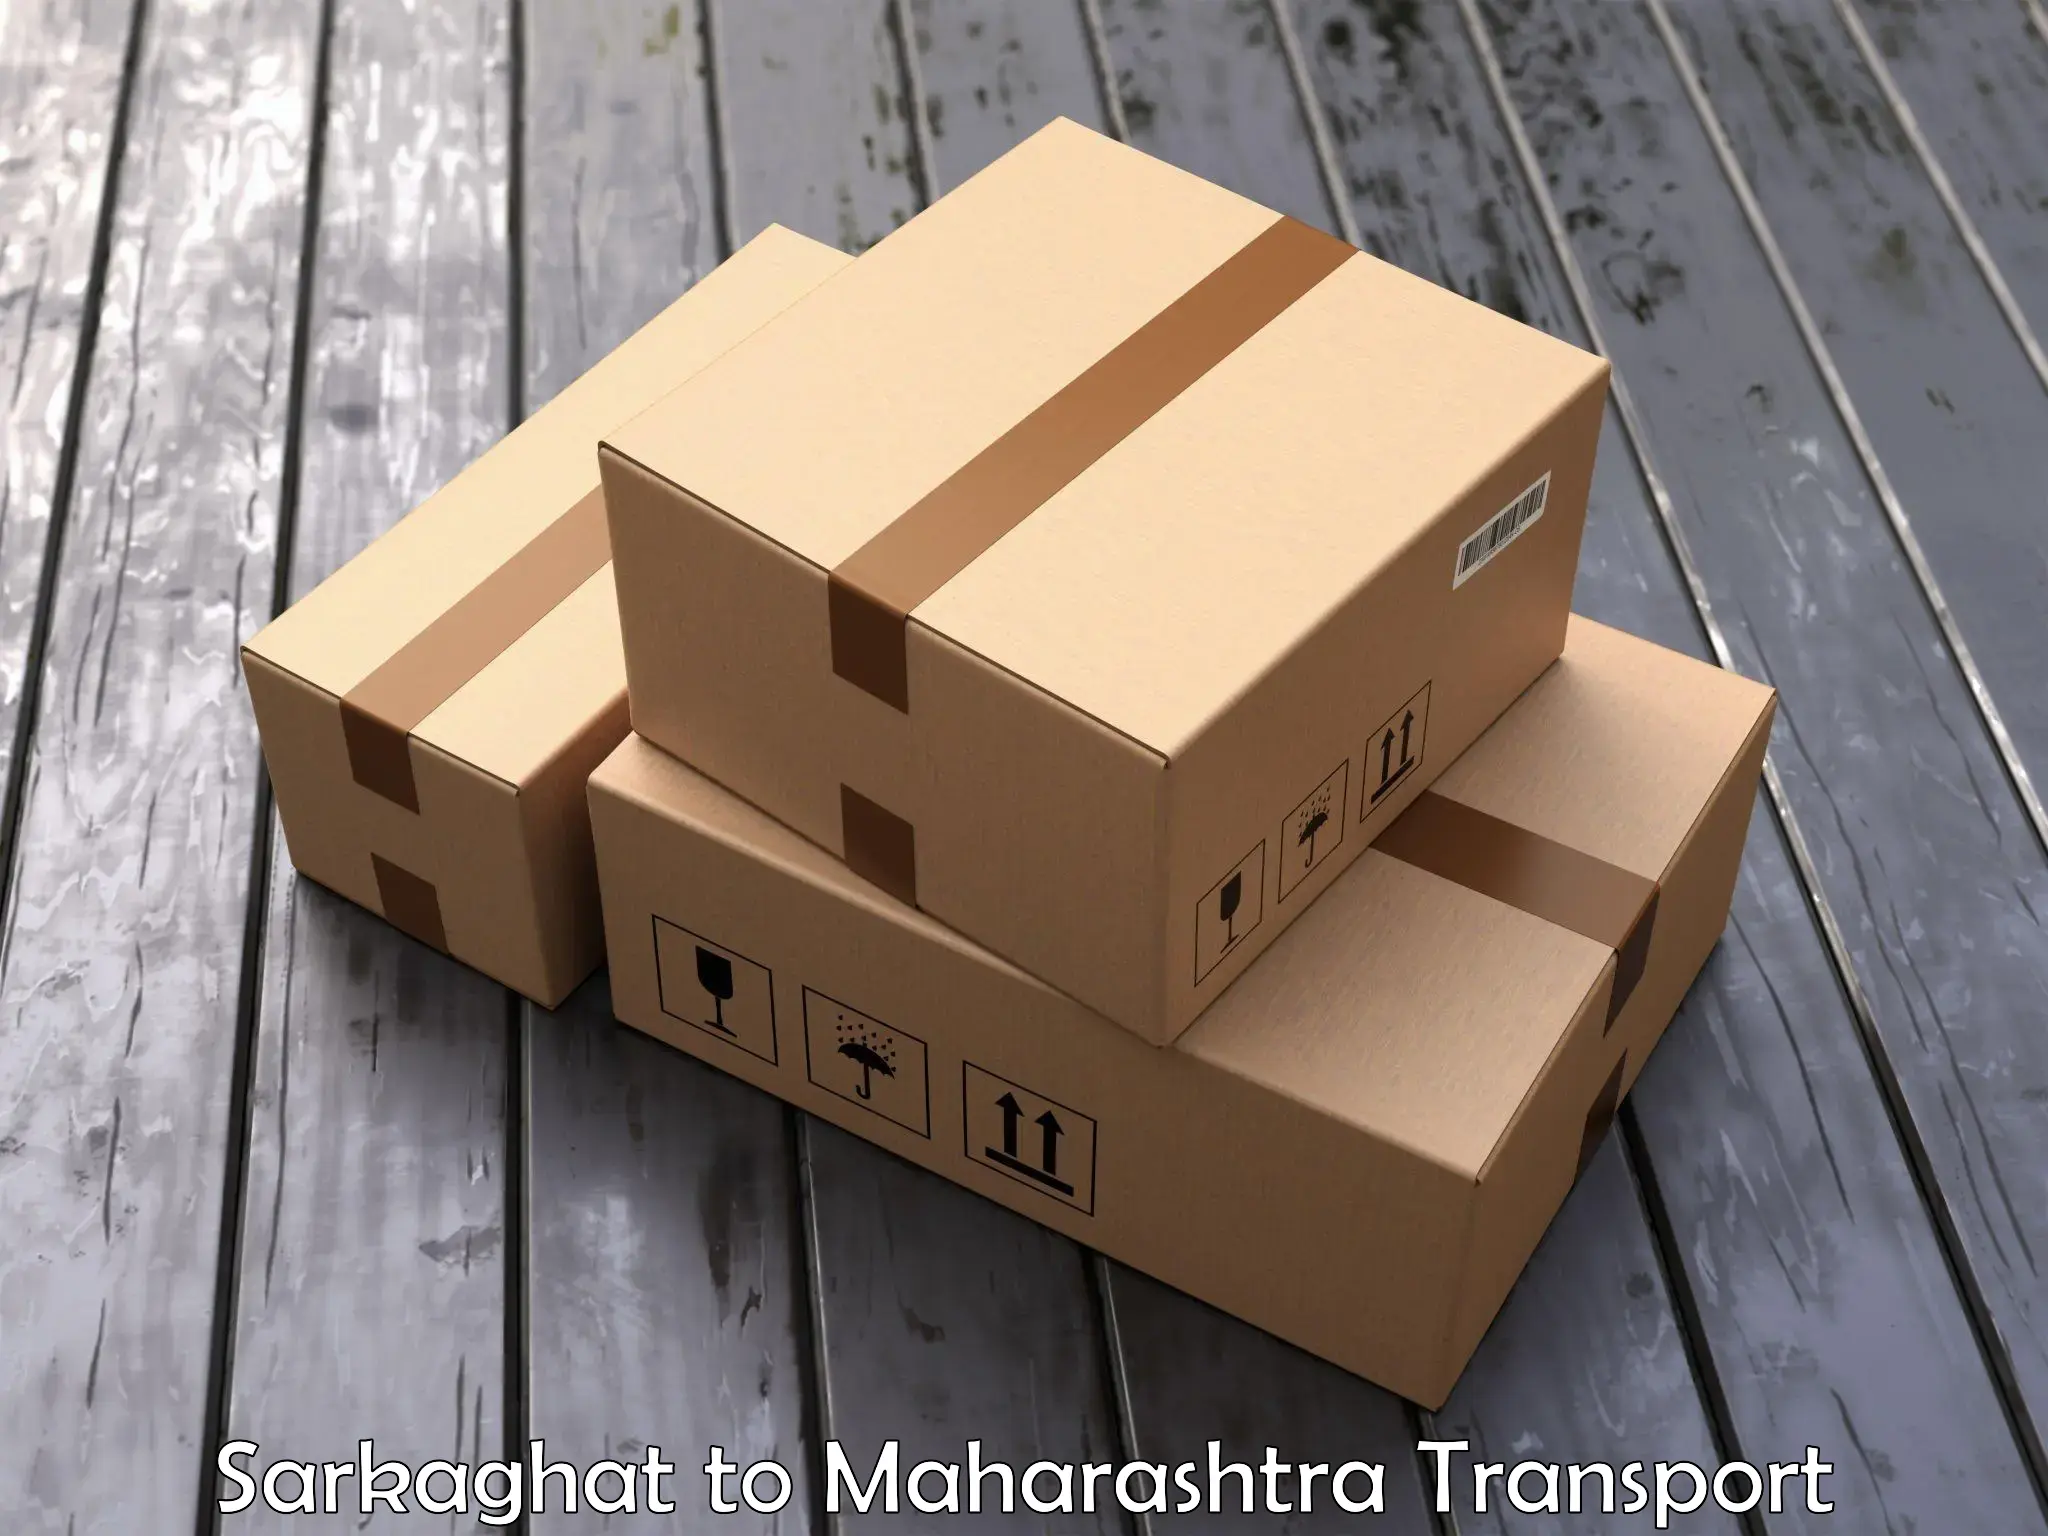 Two wheeler parcel service Sarkaghat to Symbiosis International Pune